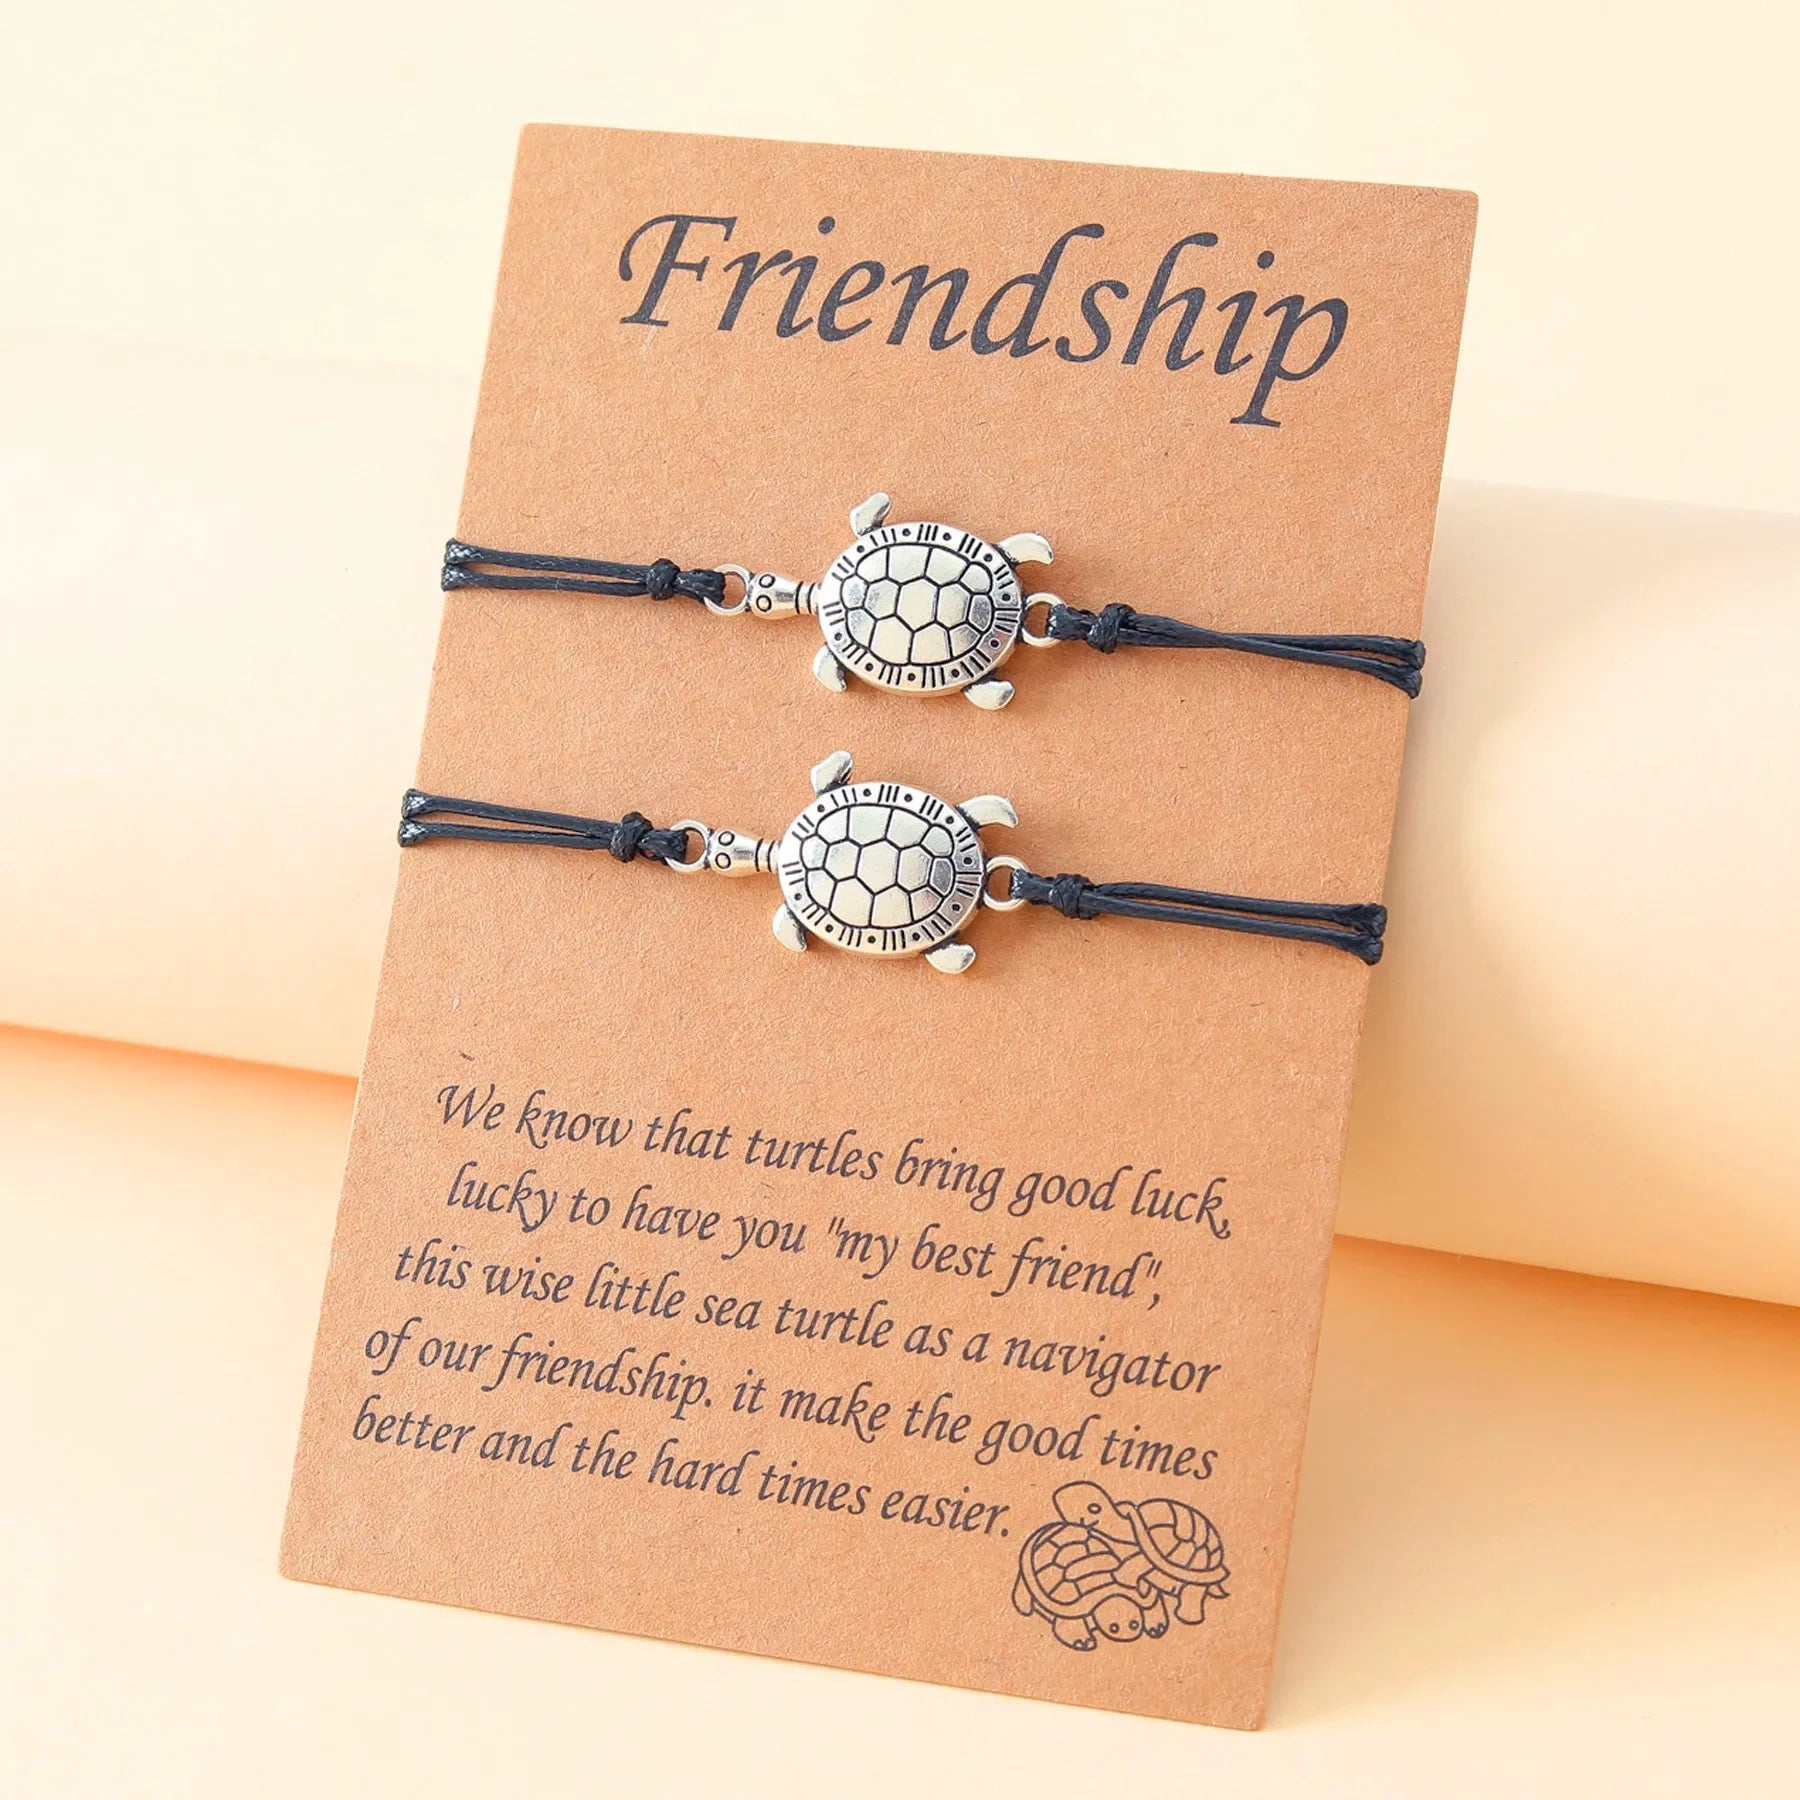 Personalized Sea Turtle Handwoven Bracelet with Friendship Card - Madeinsea©